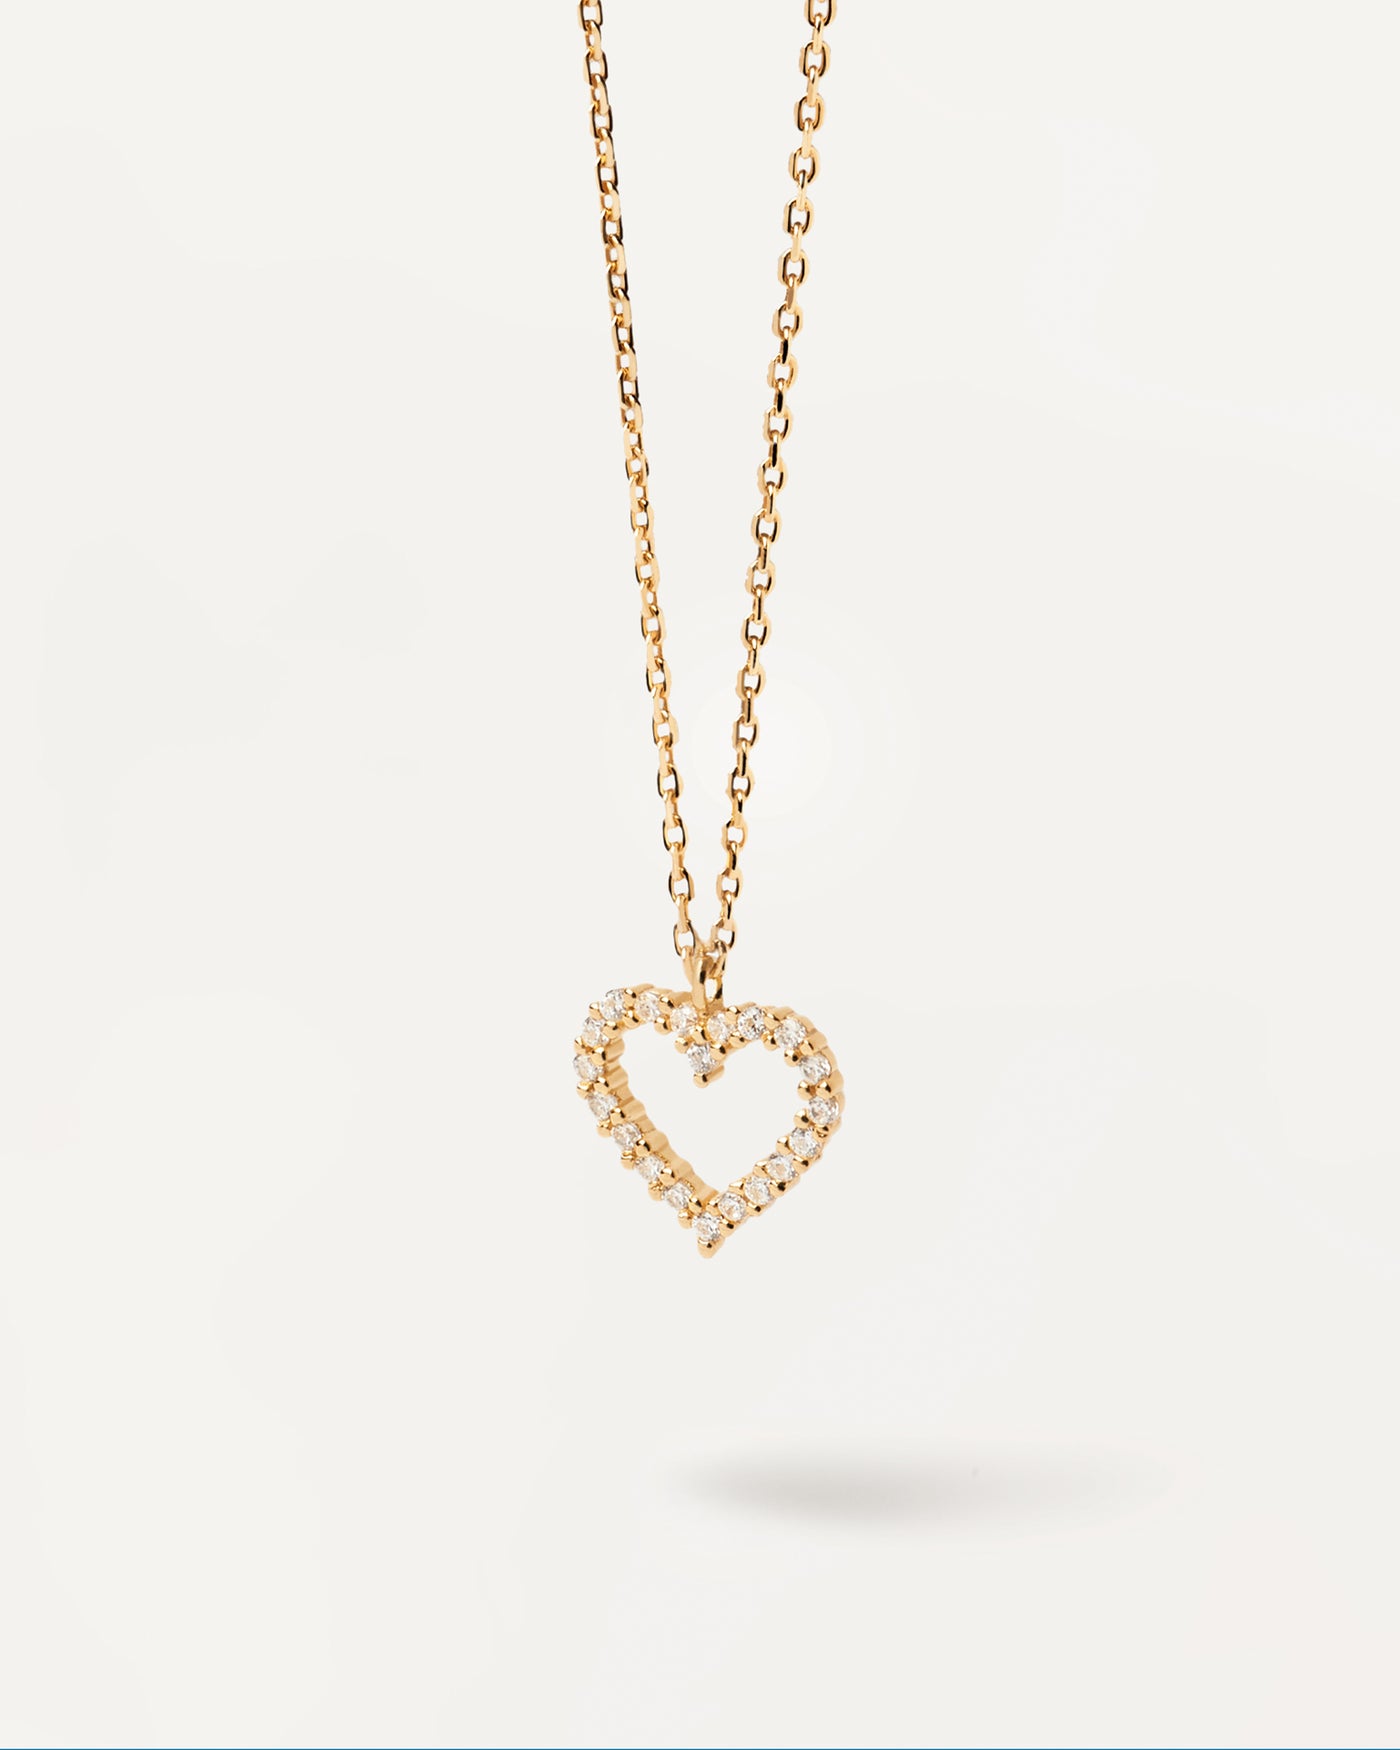 White Heart Necklace Gold - 925 sterling silver / 18K gold plating